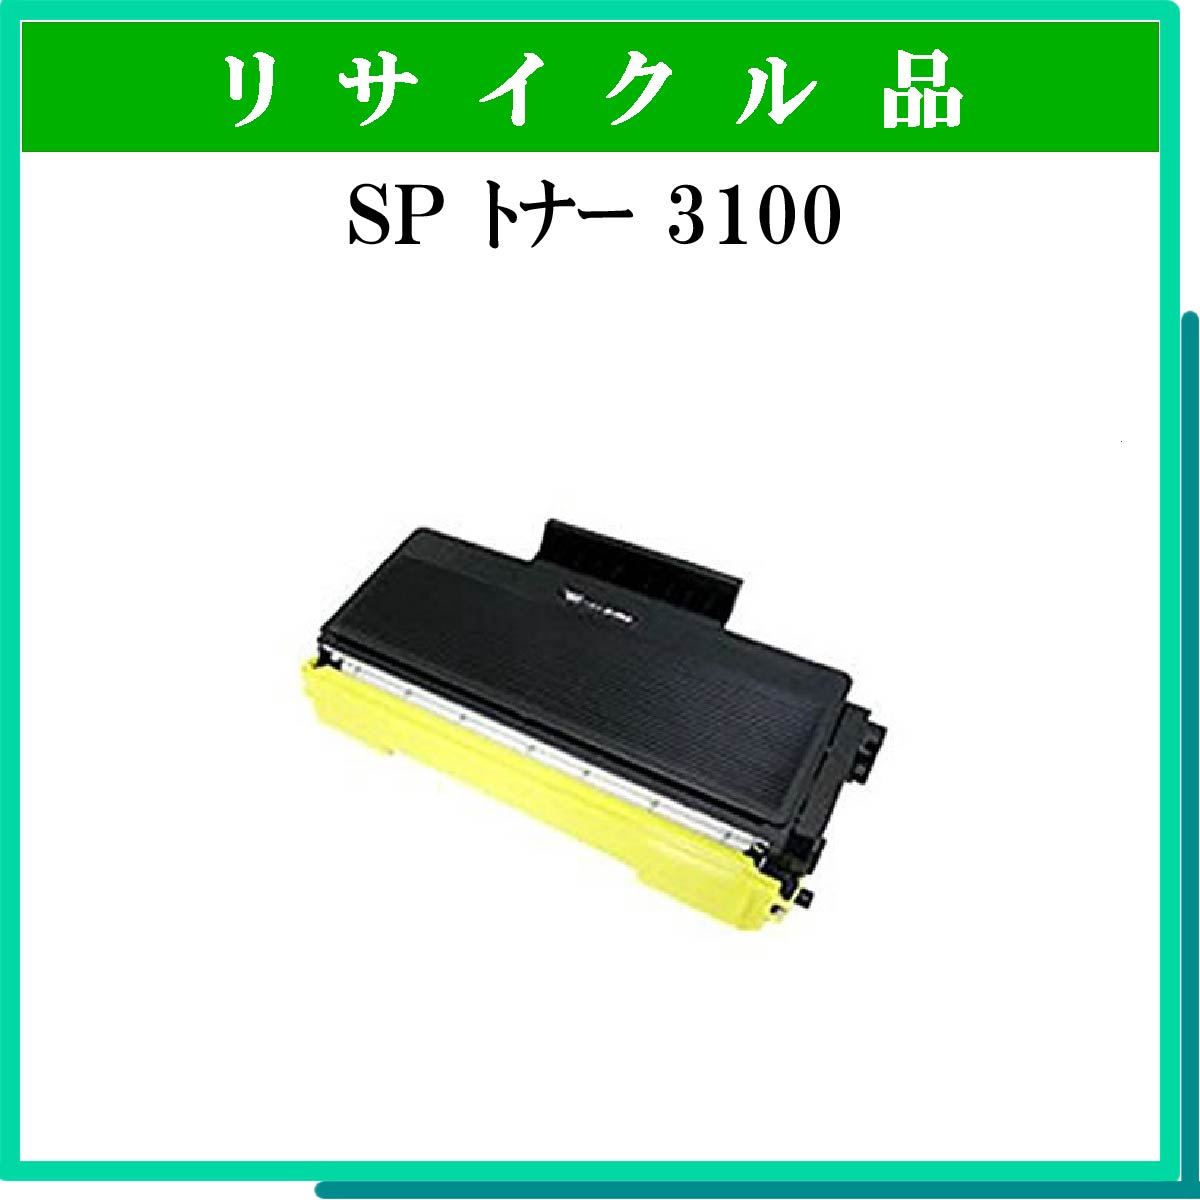 SP ﾄﾅｰ ﾀｲﾌﾟ3100